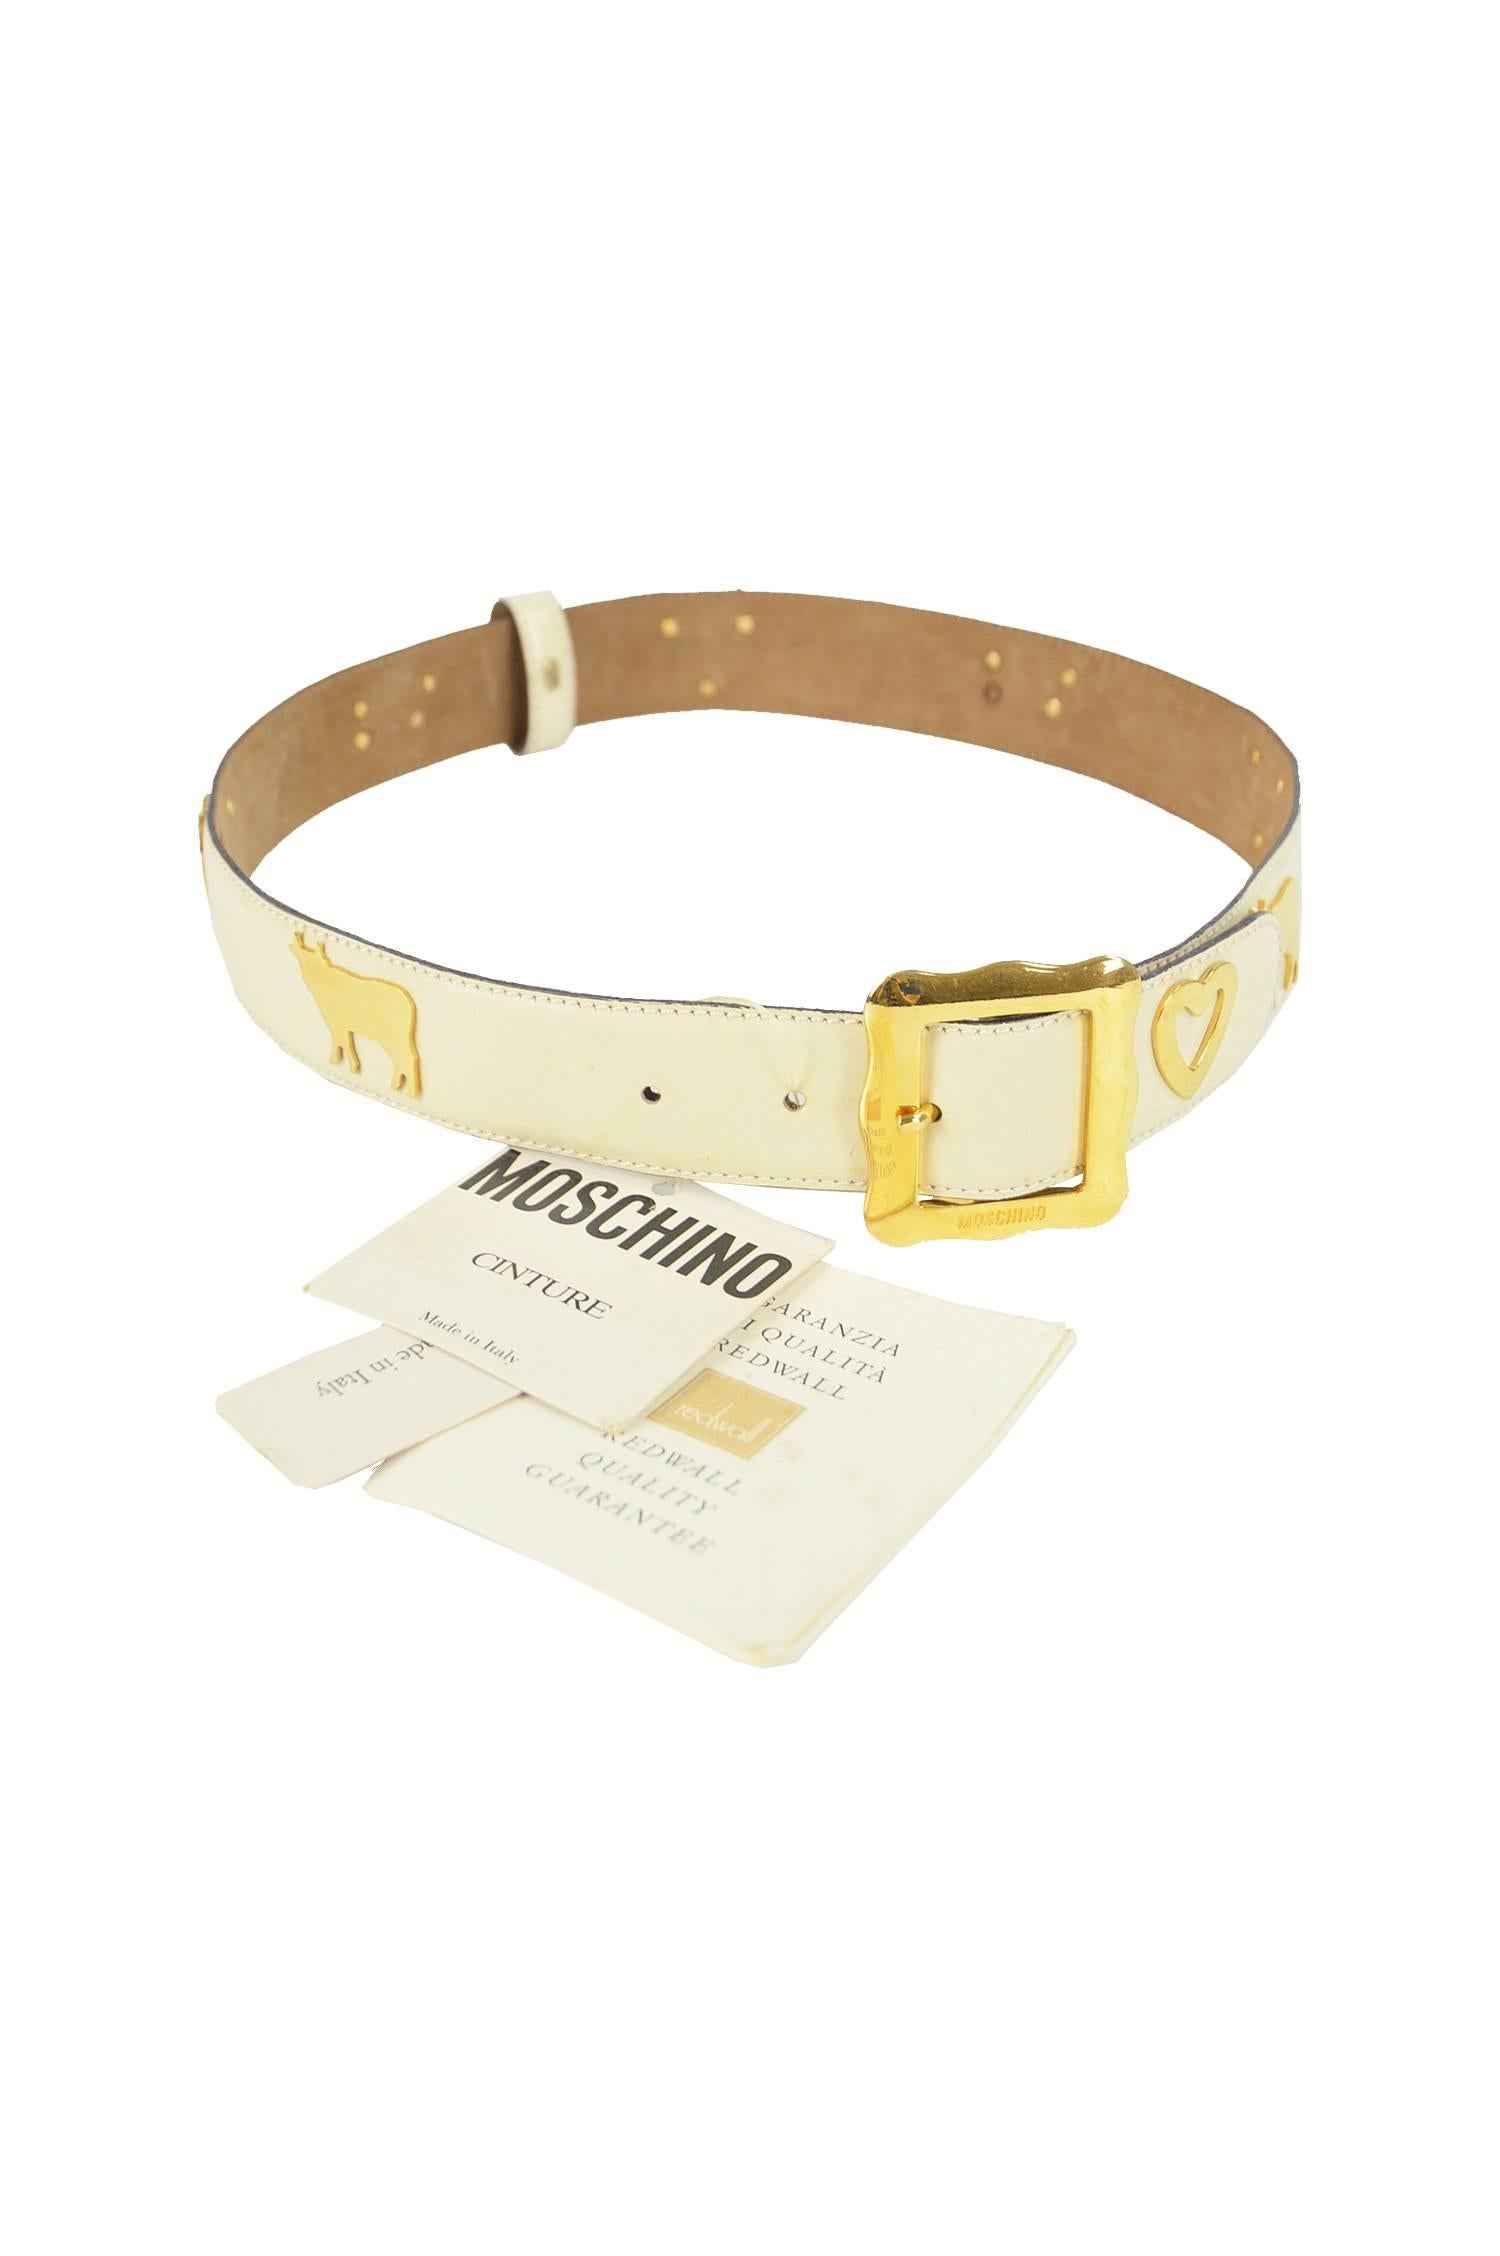 Moschino Vintage White & Gold Leather Belt with Cows & Hearts, 1980s NWT

Estimated Size: UK 8-10/ US 4-6/ EU 36-38. Please check measurements. 
Width (Smallest notch) - 26” / 66cm
Width (Largest notch) - 28” / 71cm
Length - 1.4” / 3.5cm

Condition: